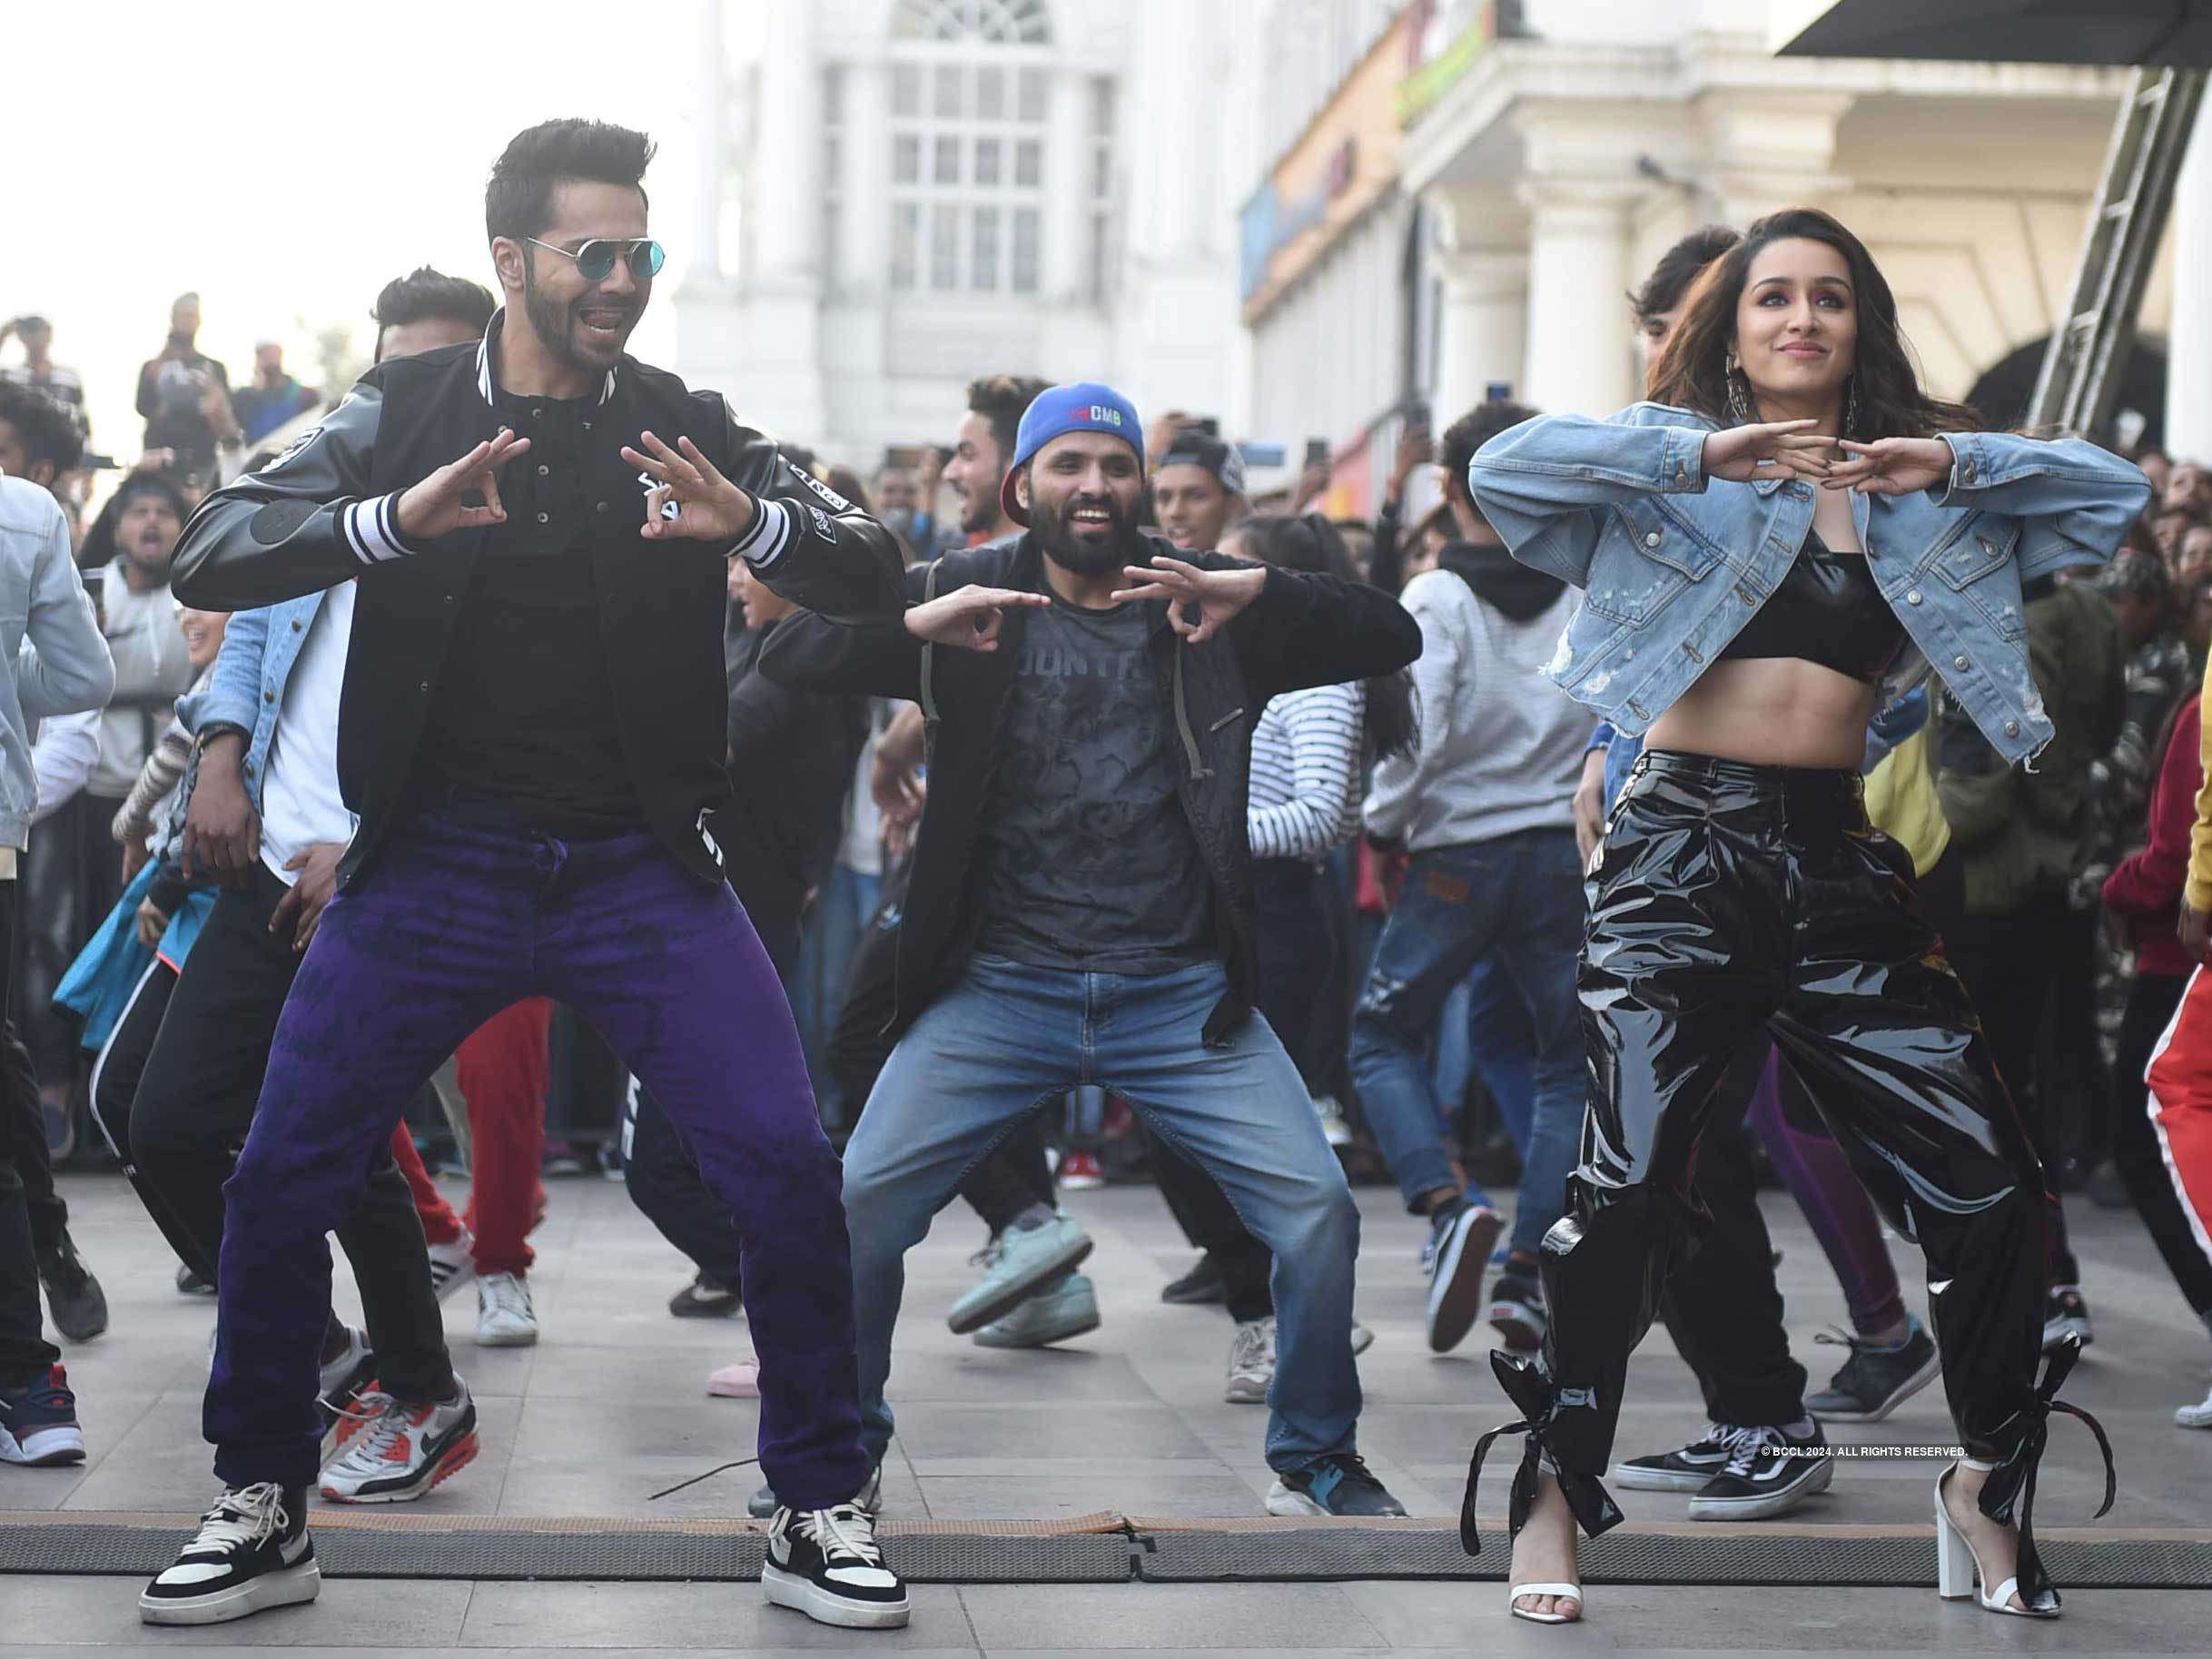 Street Dancers Varun Dhawan And Shraddha Kapoor Reach Delhi For Illegal Weapon 2 0 Song Launch Hindi Movie News Times Of India